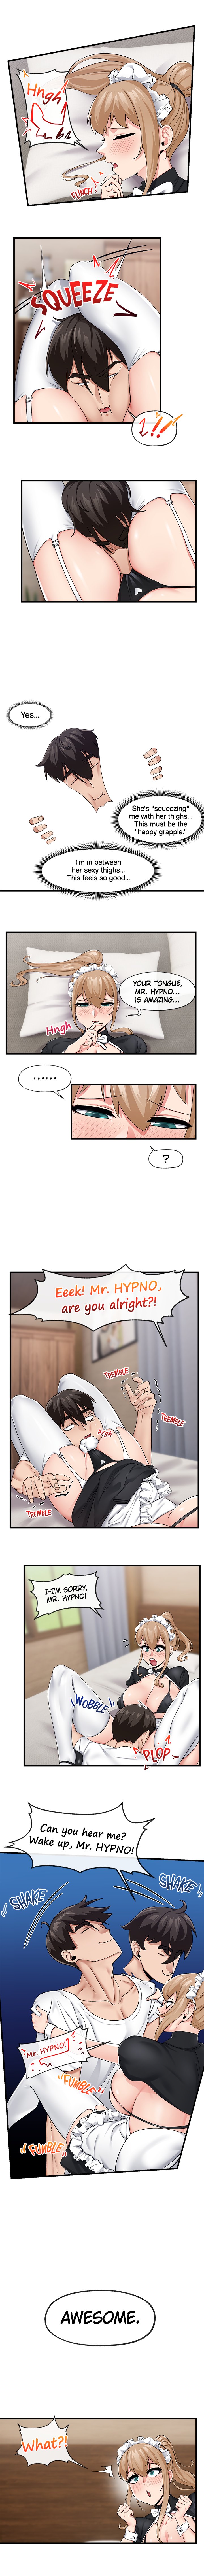 Absolute Hypnosis in Another World image